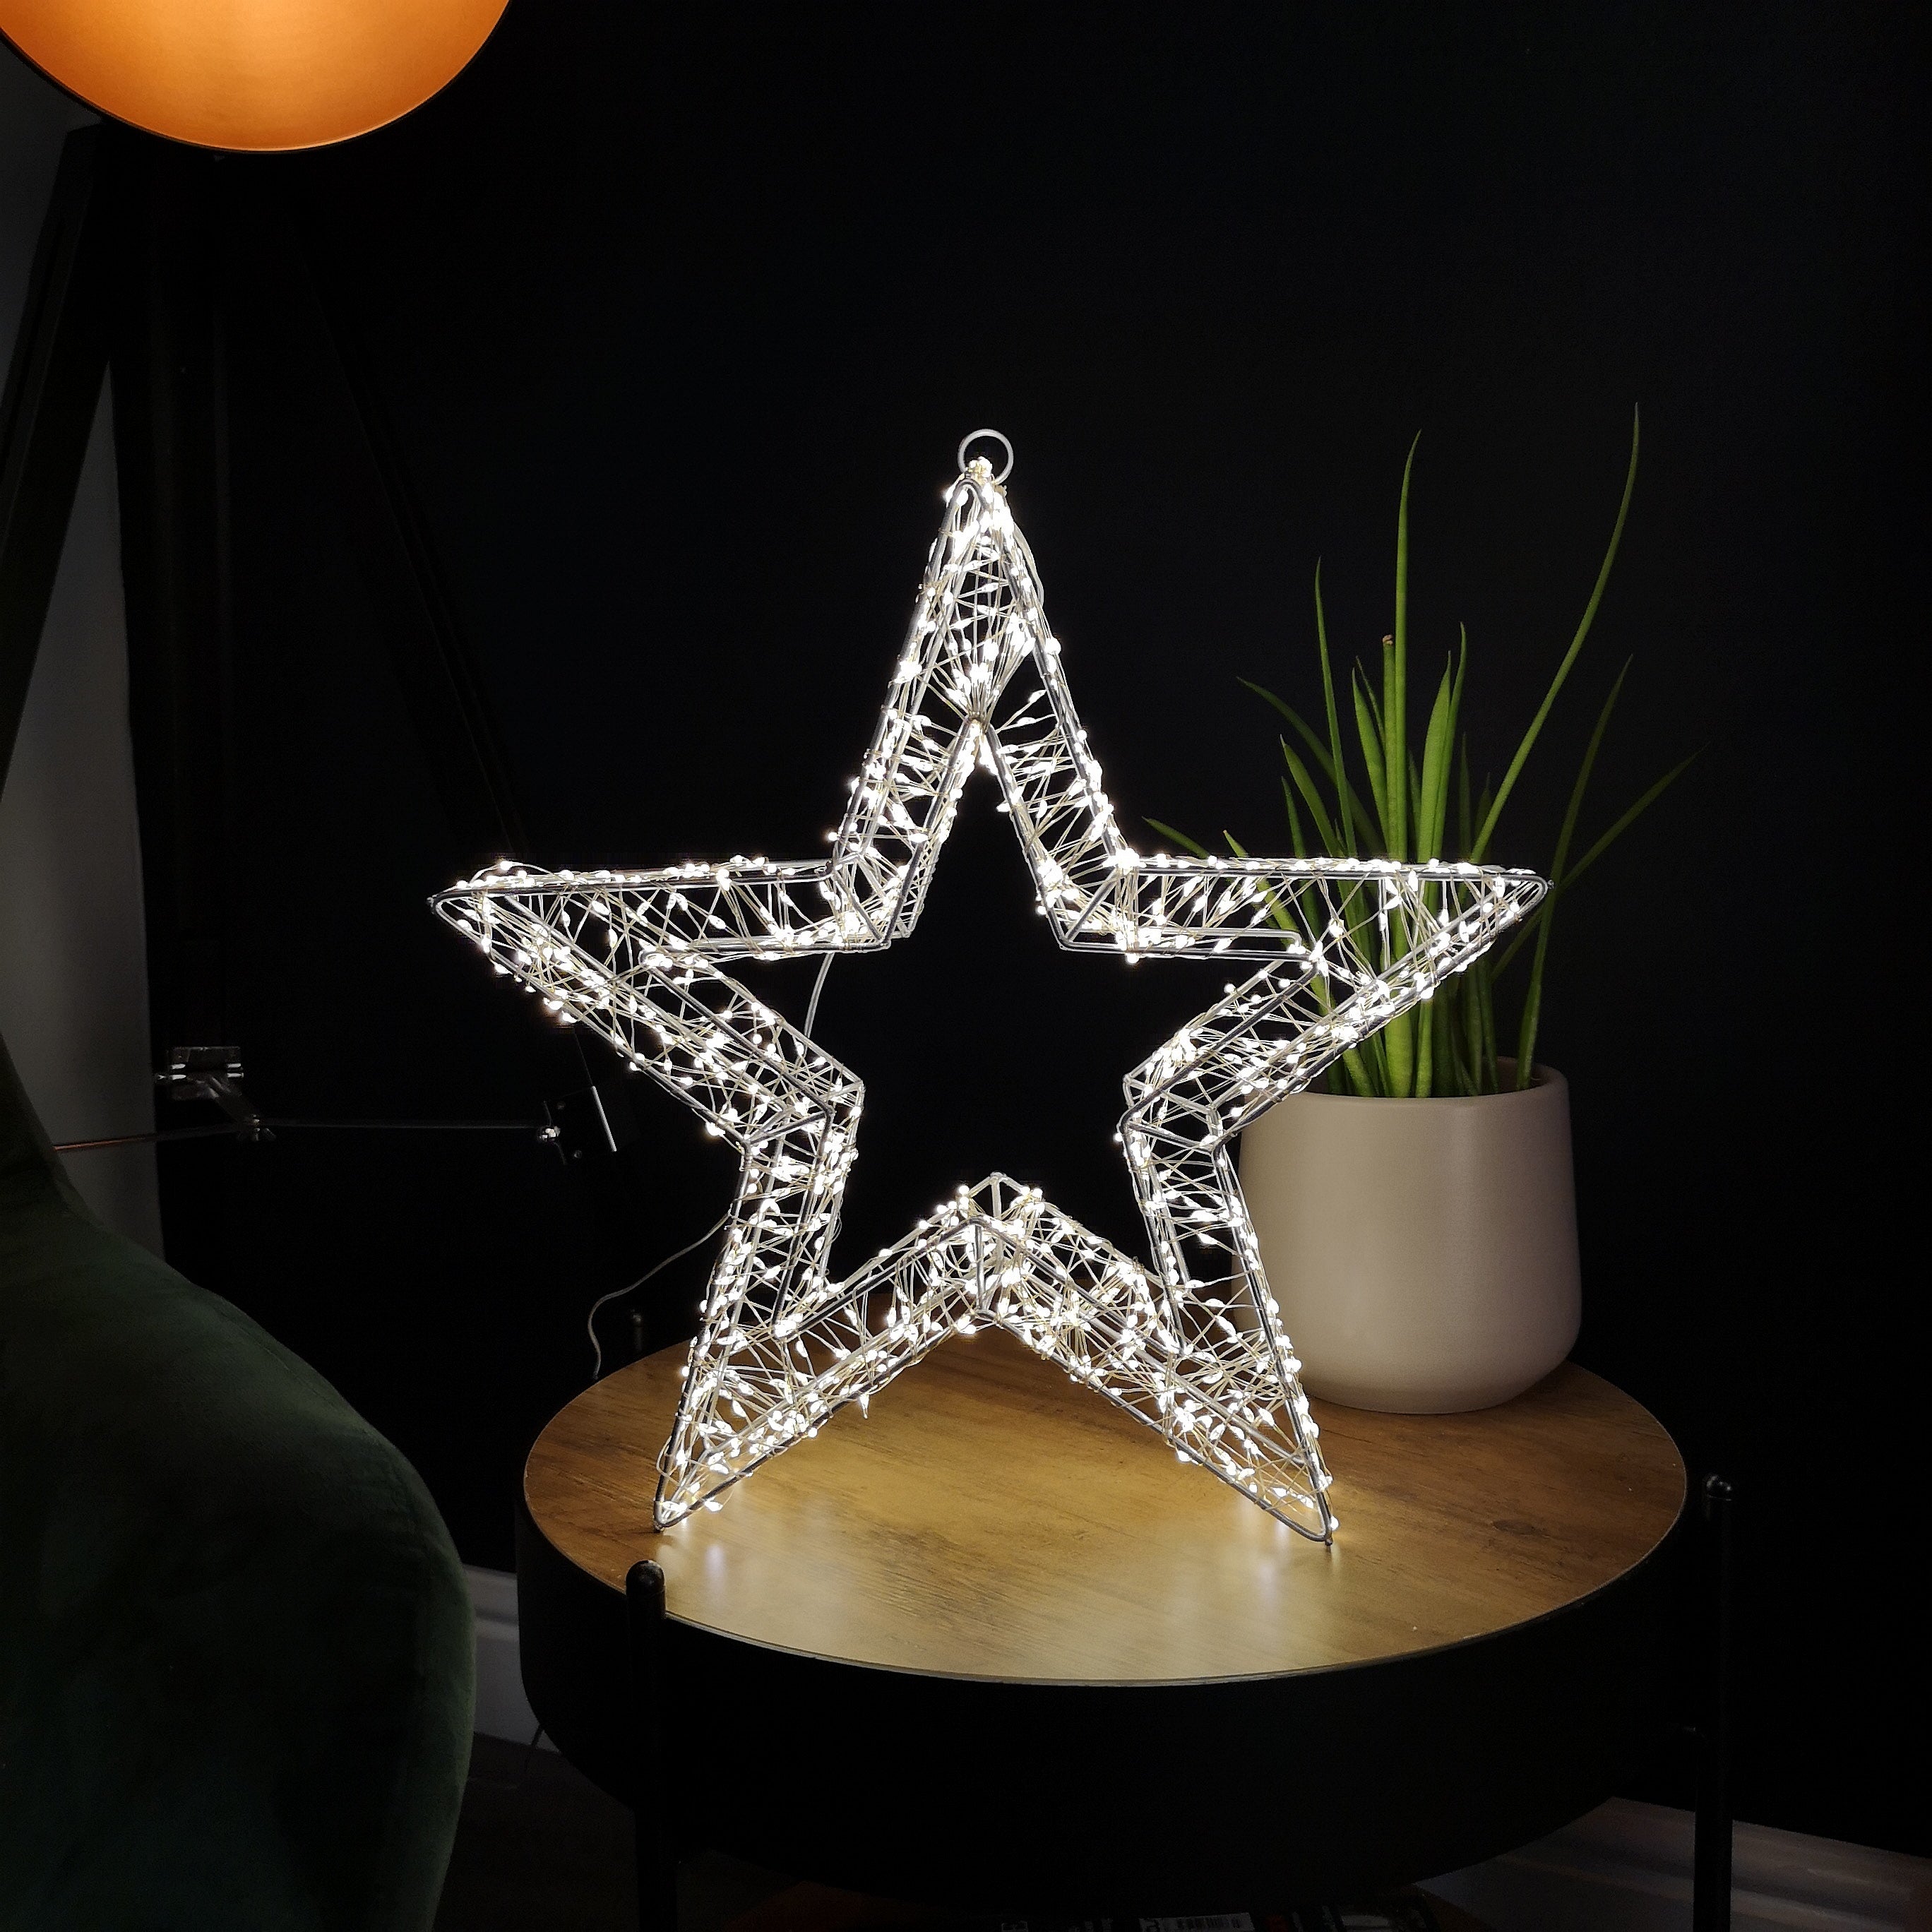 960 LED 38cm Tall Christmas Galaxy Light Up Star Decoration with Warm White Lights